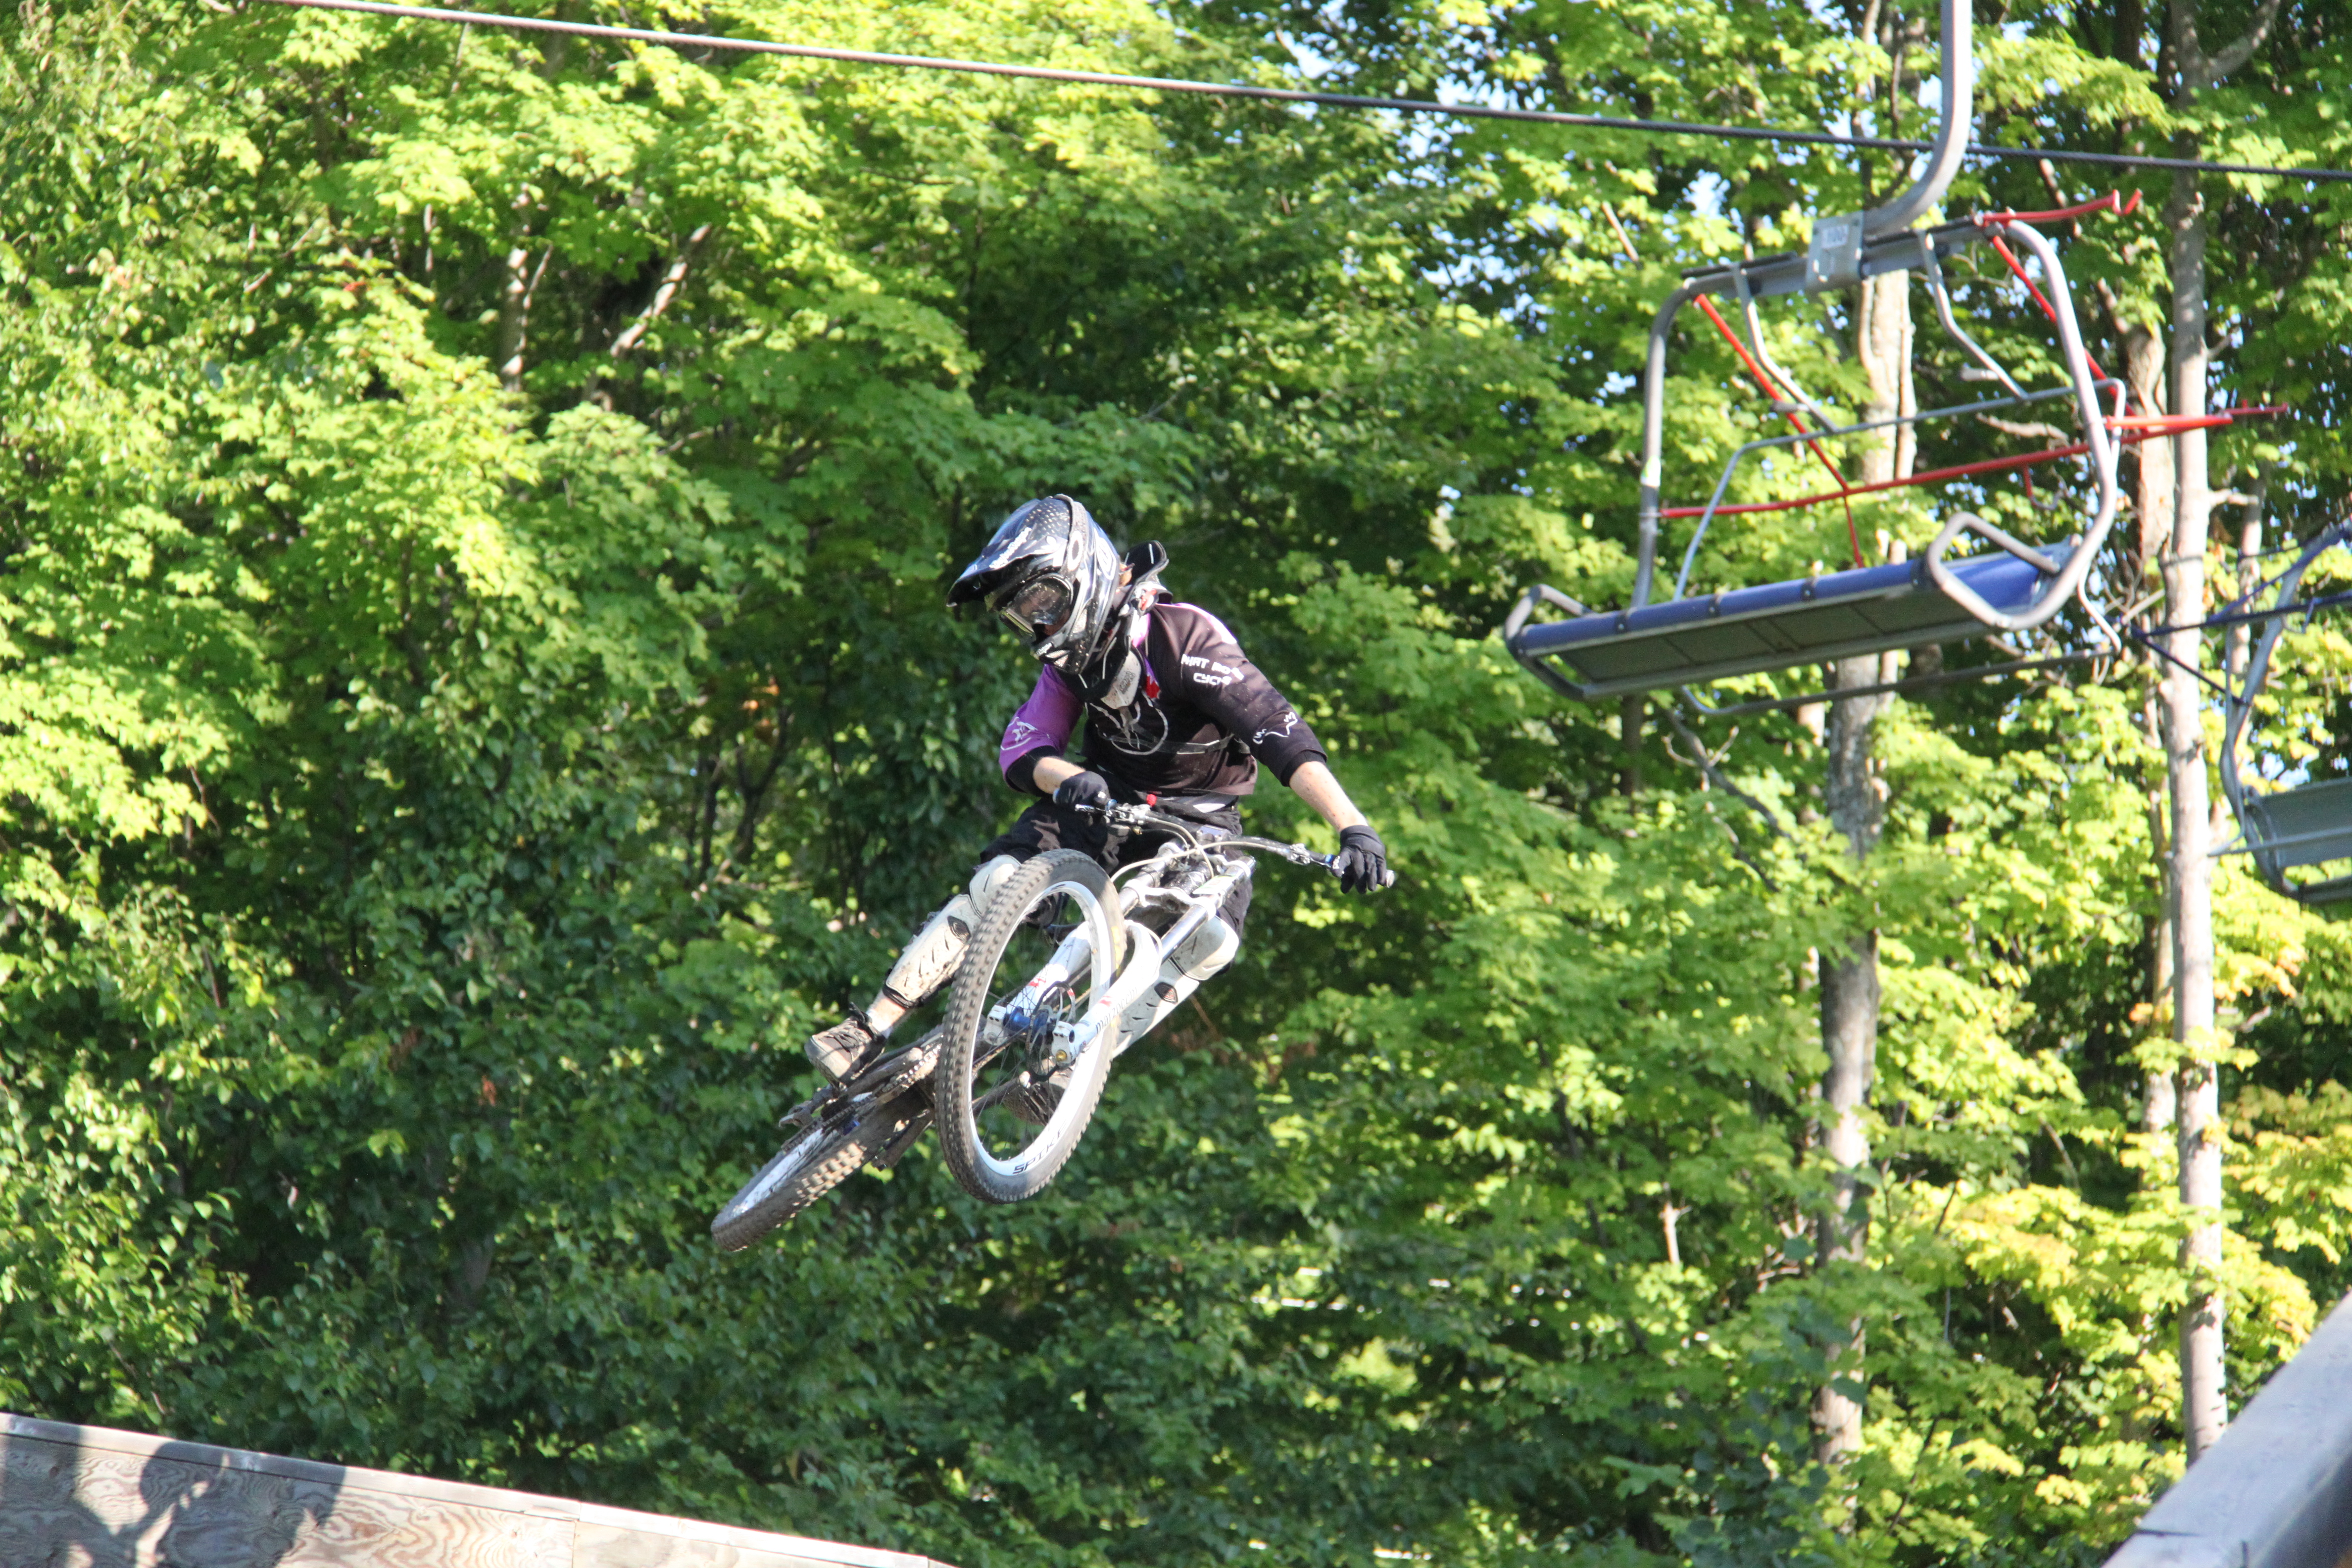 Downhill rider getting some air at Ski Bromont, Bromont, Quebec.